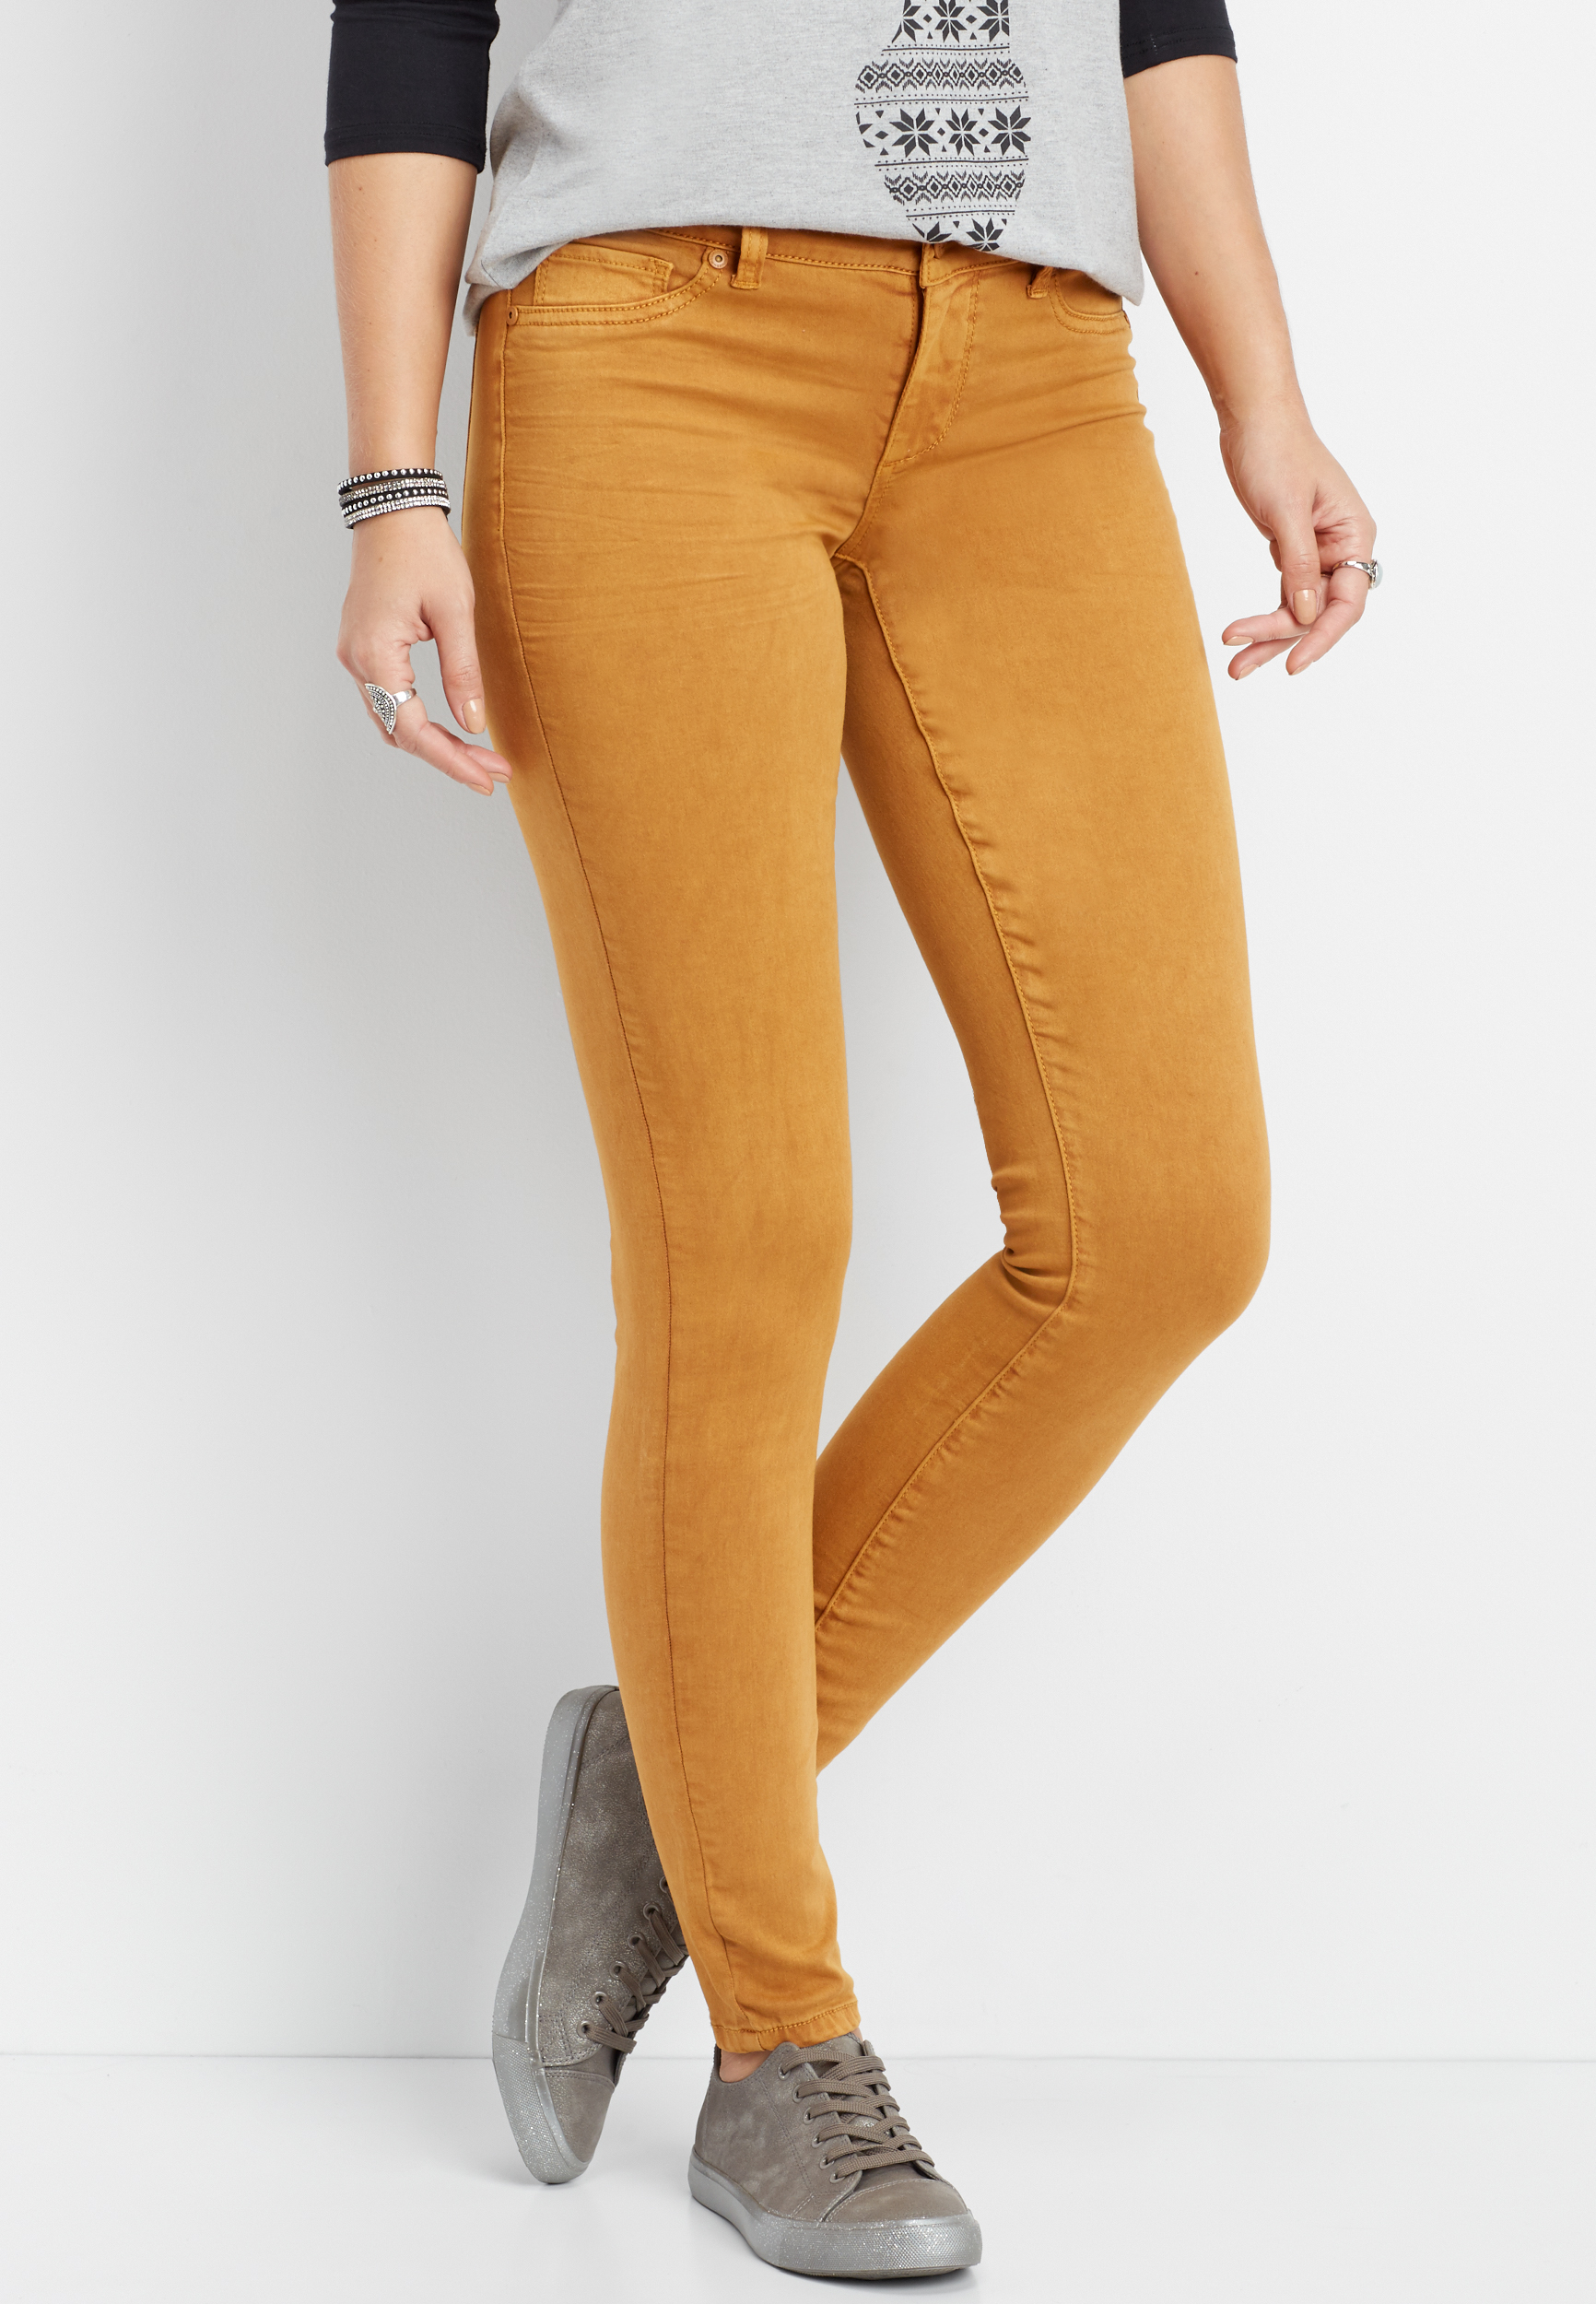 rust colored jeggings